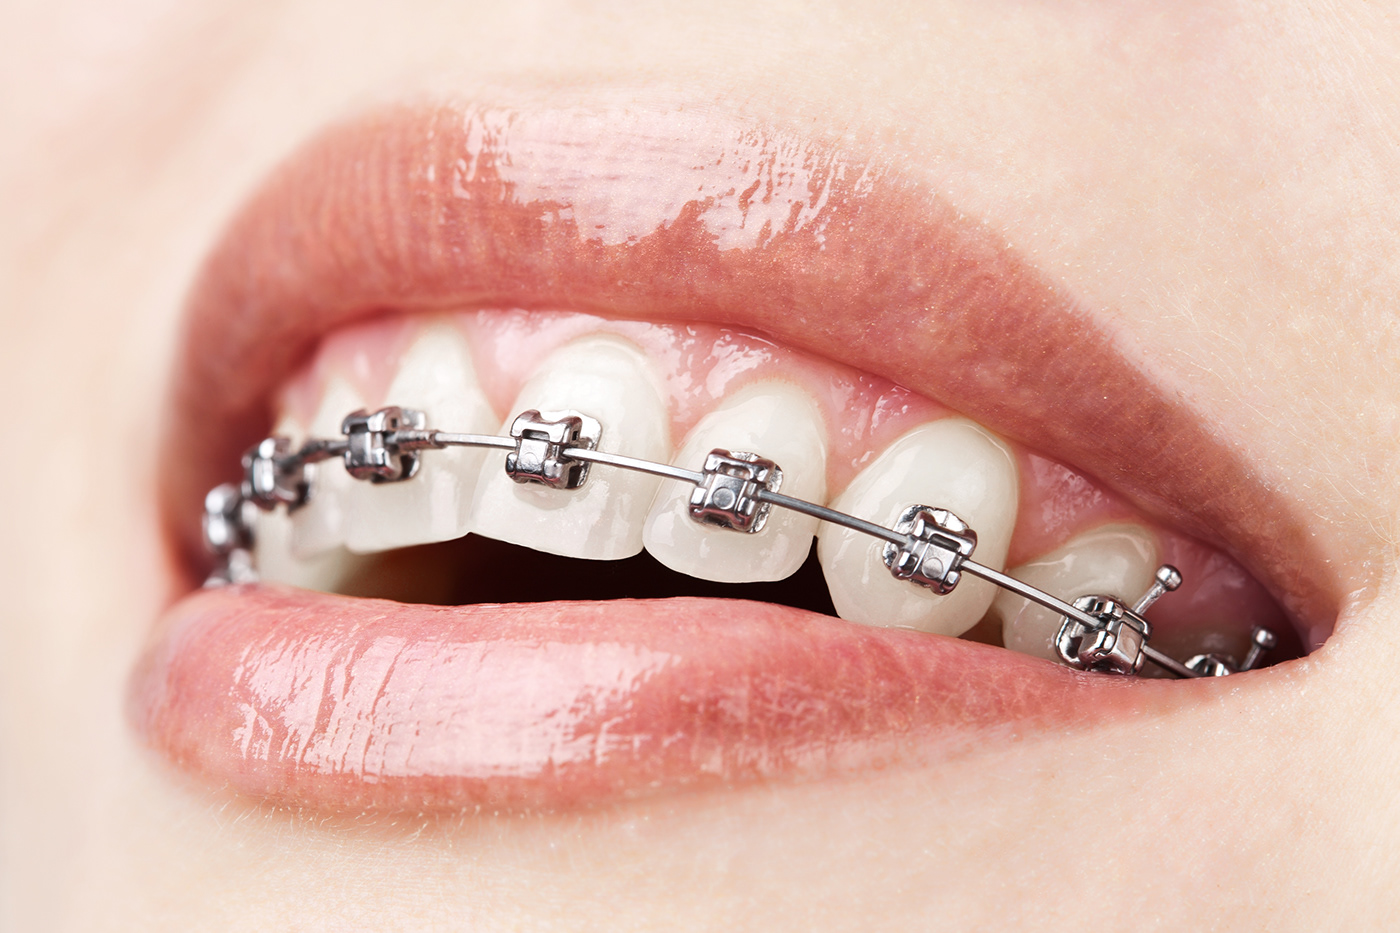 The Health Benefits of Orthodontic Treatment